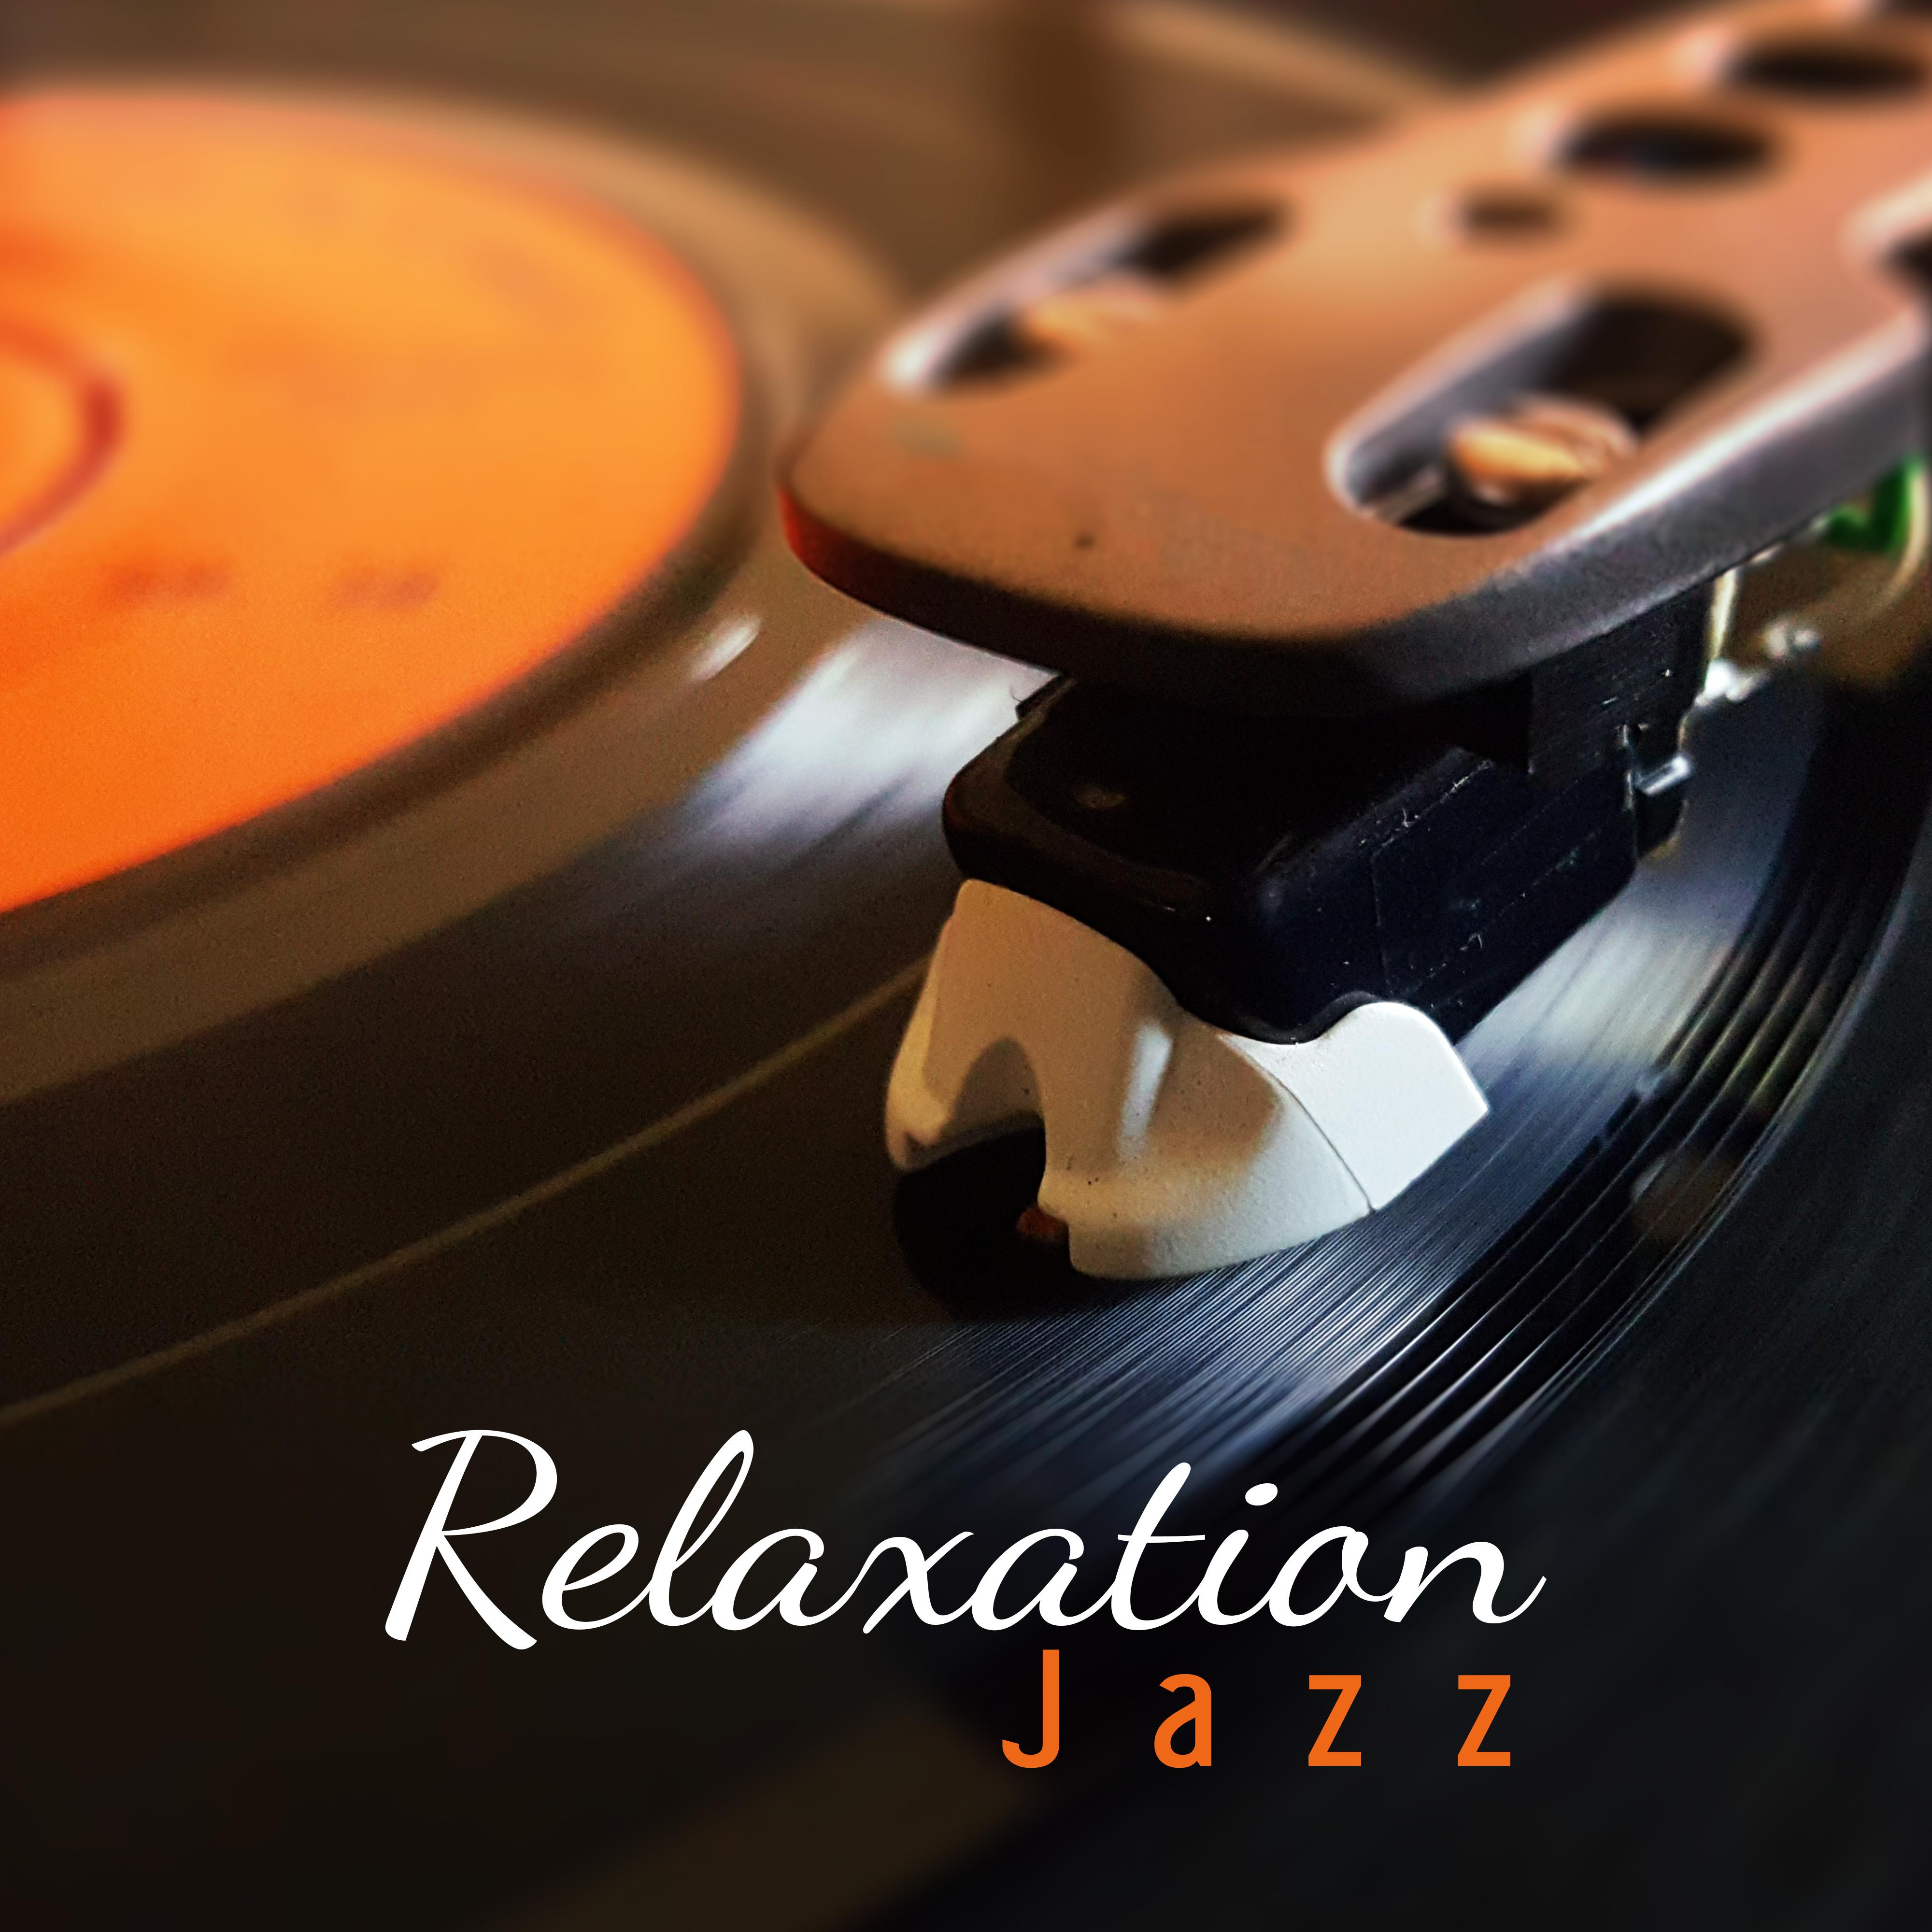 Relaxation Jazz  Best Smooth Jazz to Rest, Instrumental Music, Chillout, Deep Relax, Mellow Jazz, Soft Music, Soothing Piano